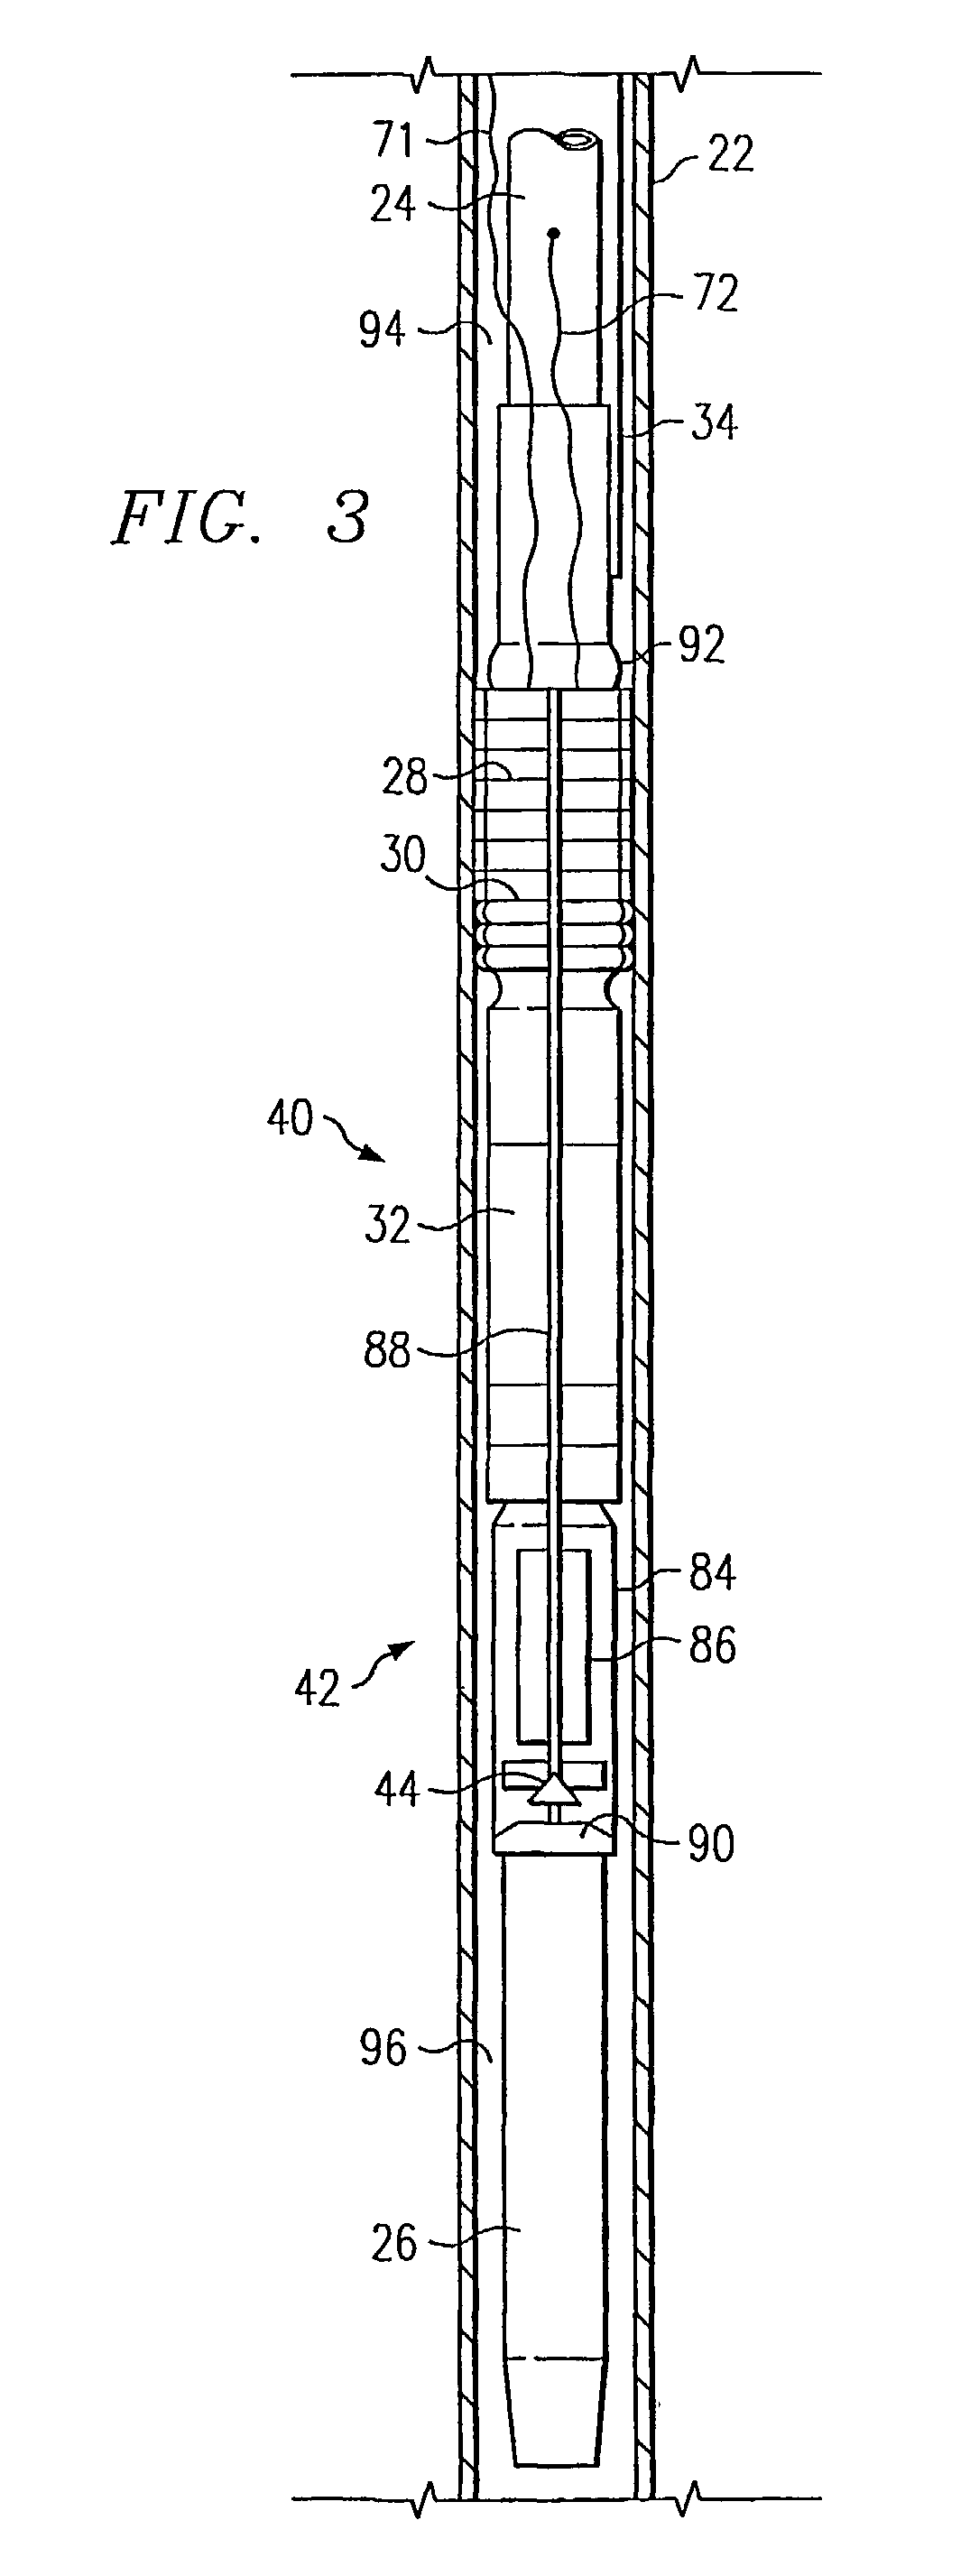 Use of downhole high pressure gas in a gas-lift well and associated methods